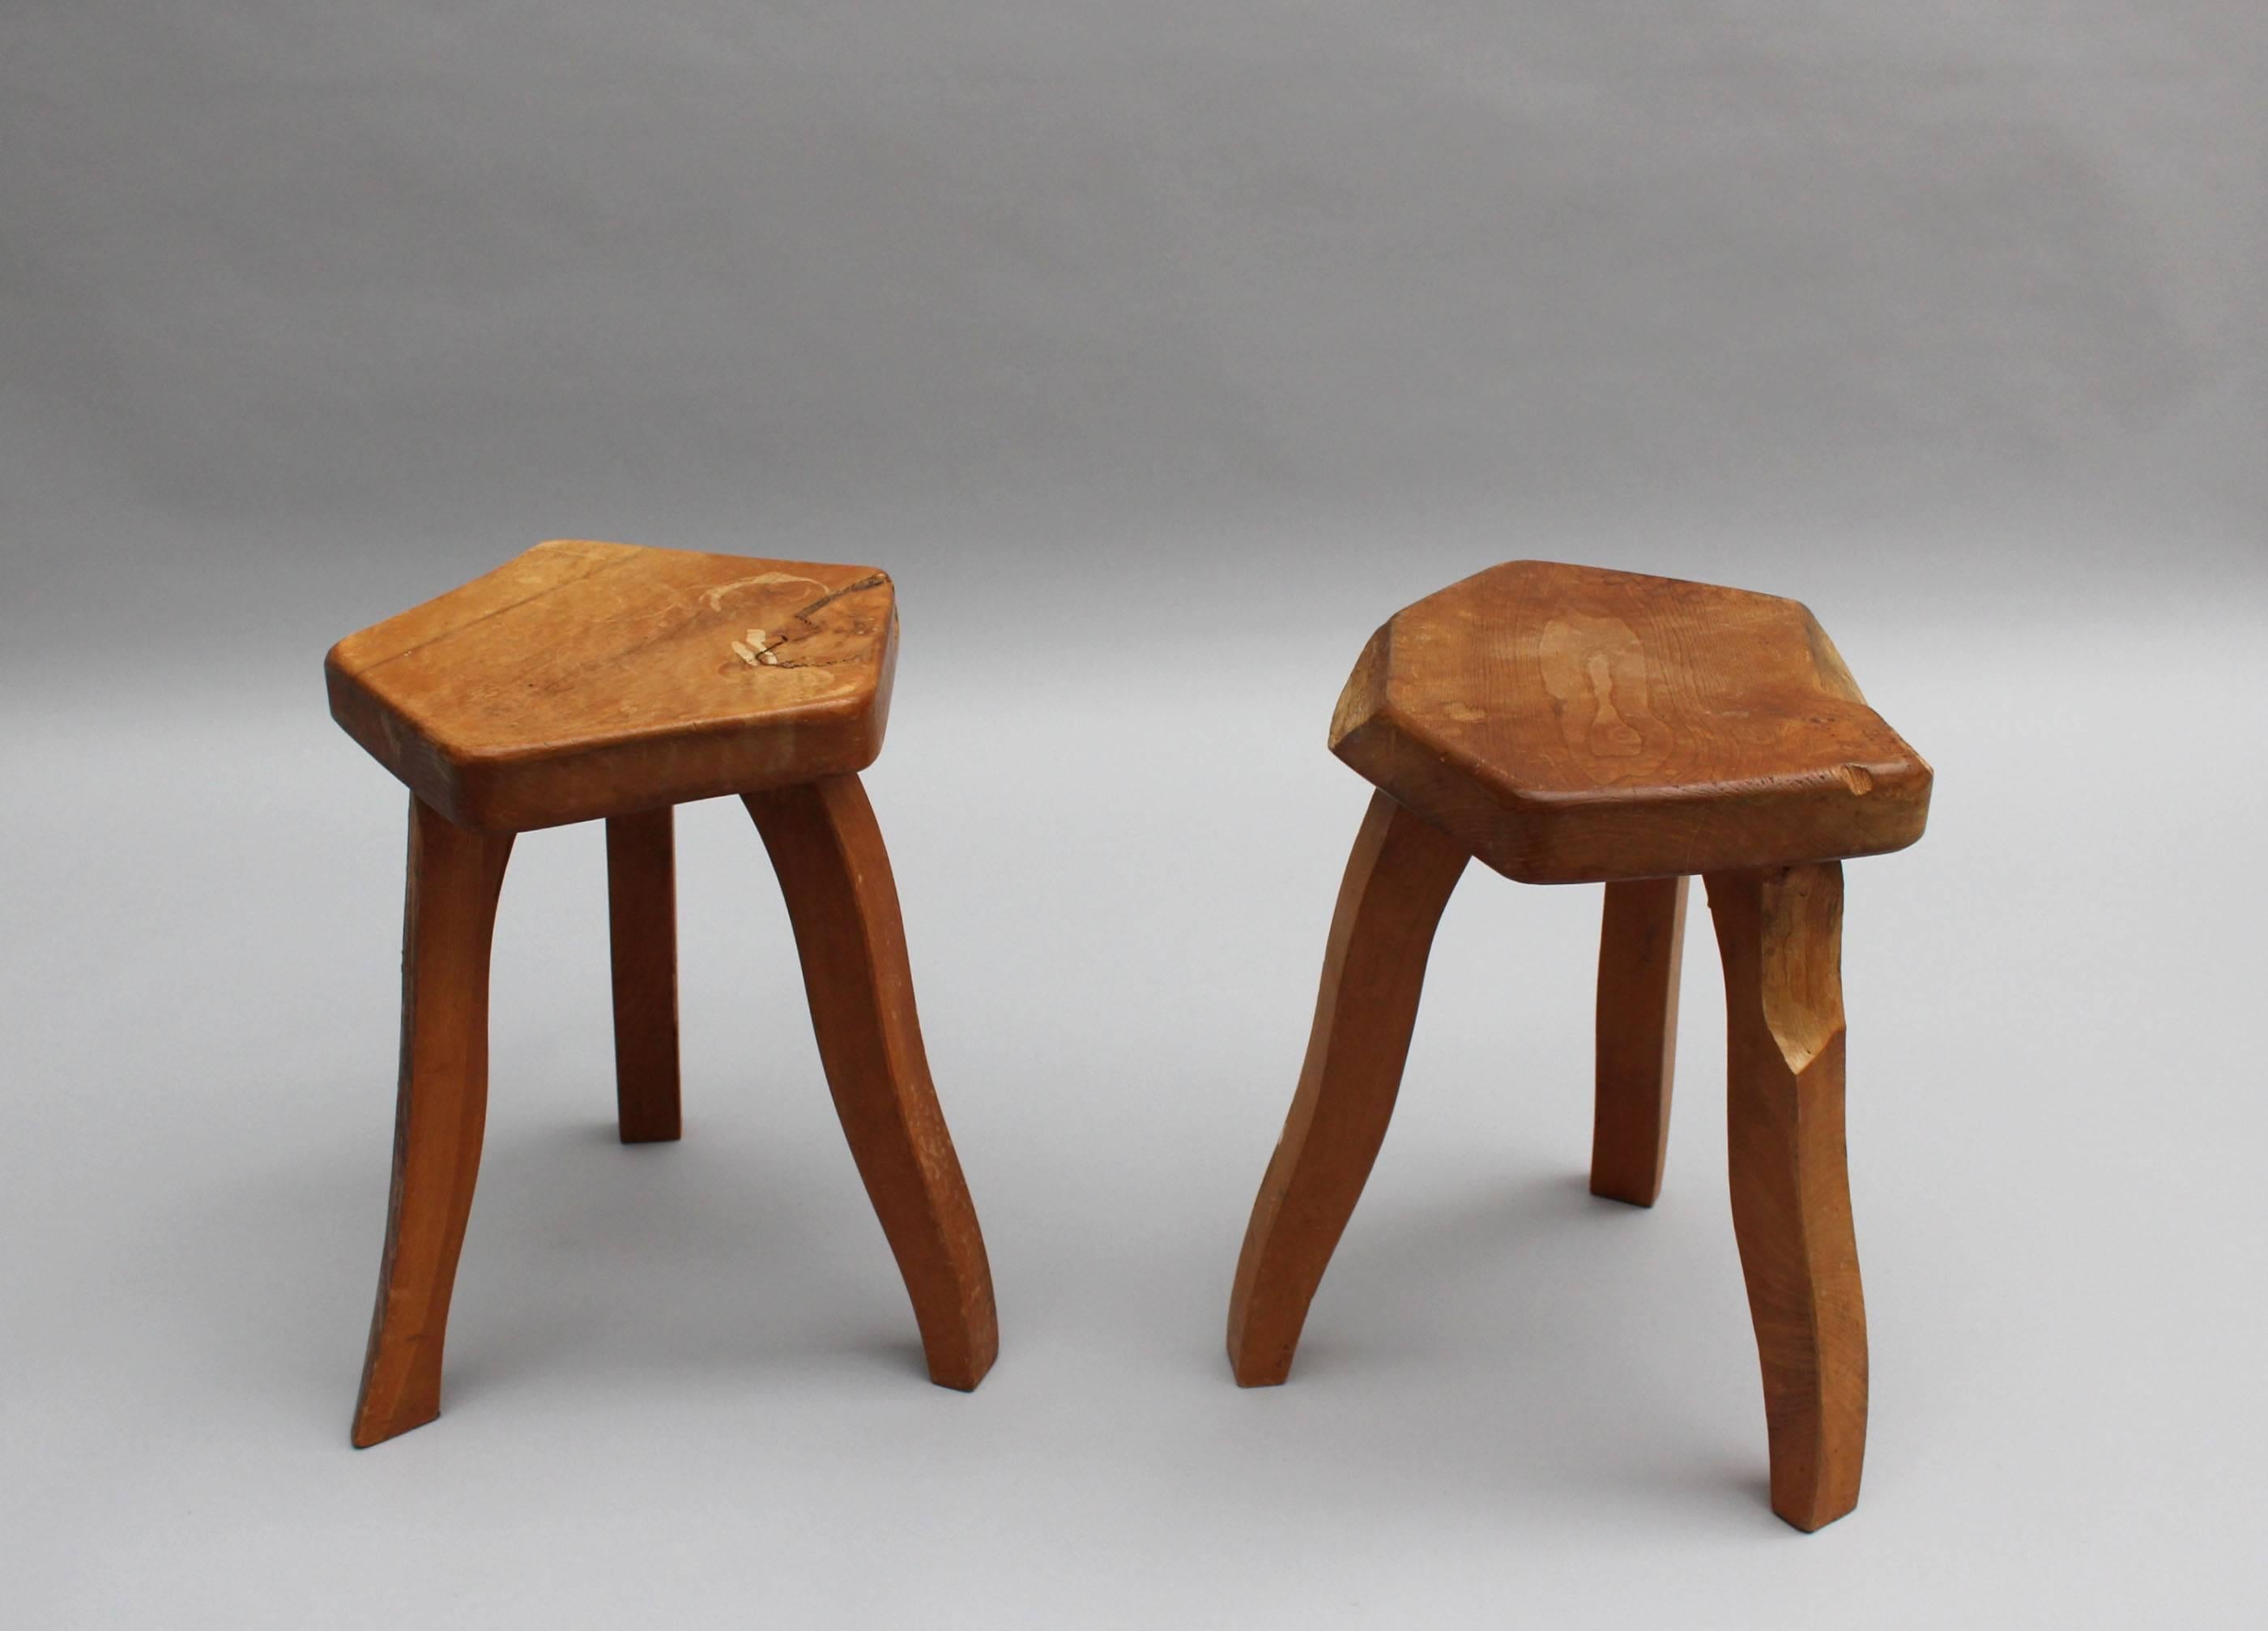 Two mid-century free-form tripod base oak stools with an organic hexagonal shape seat.
Price is per stool.